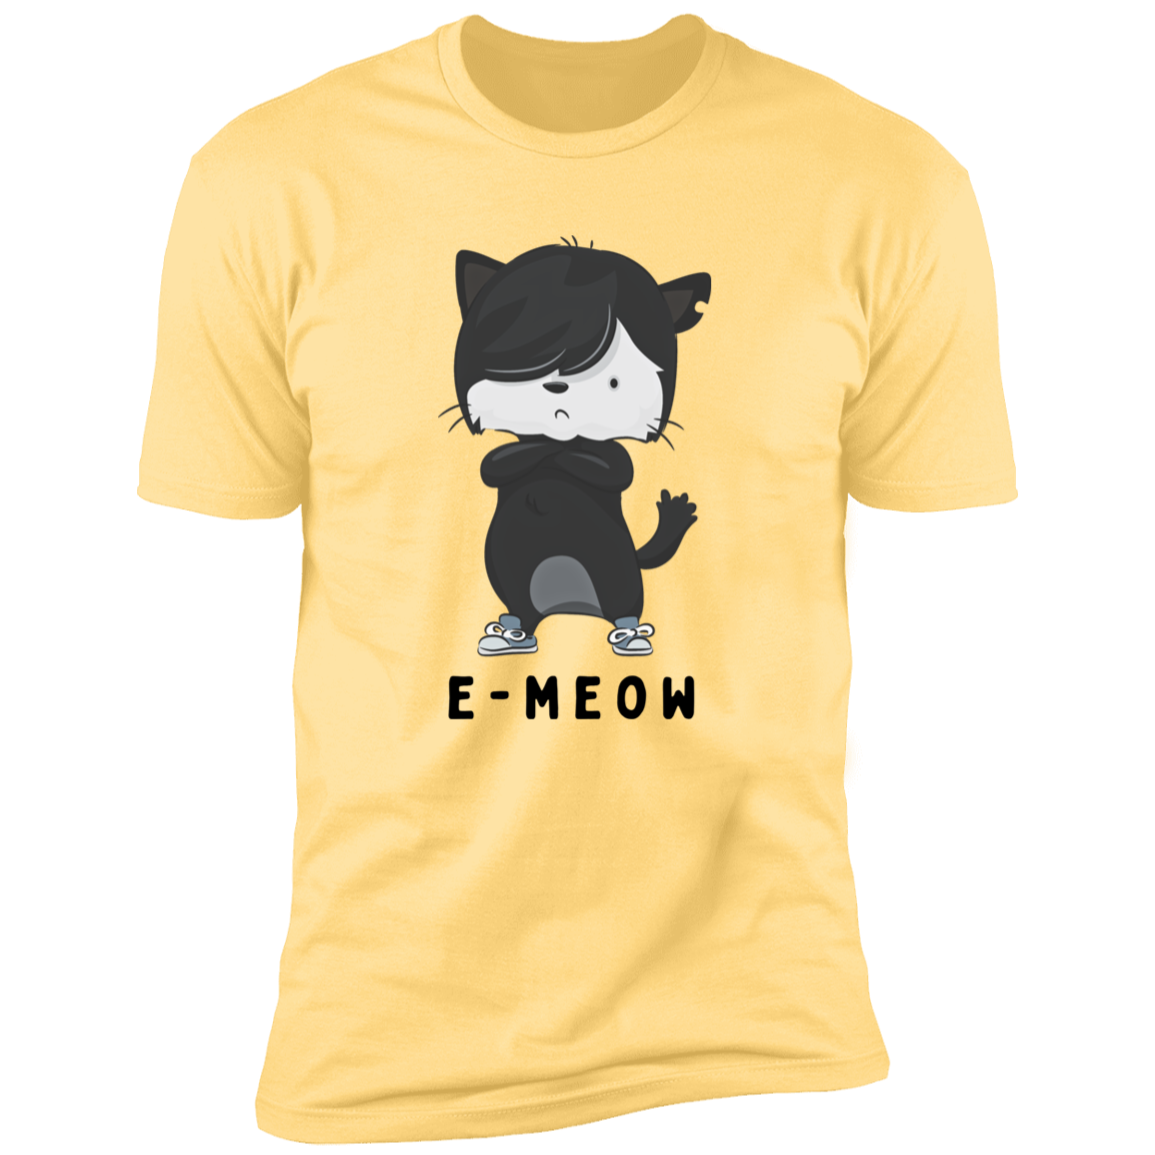 E-meow cat shirt, funny cat shirt for humans, cat mom and cat dad shirt, in banana 